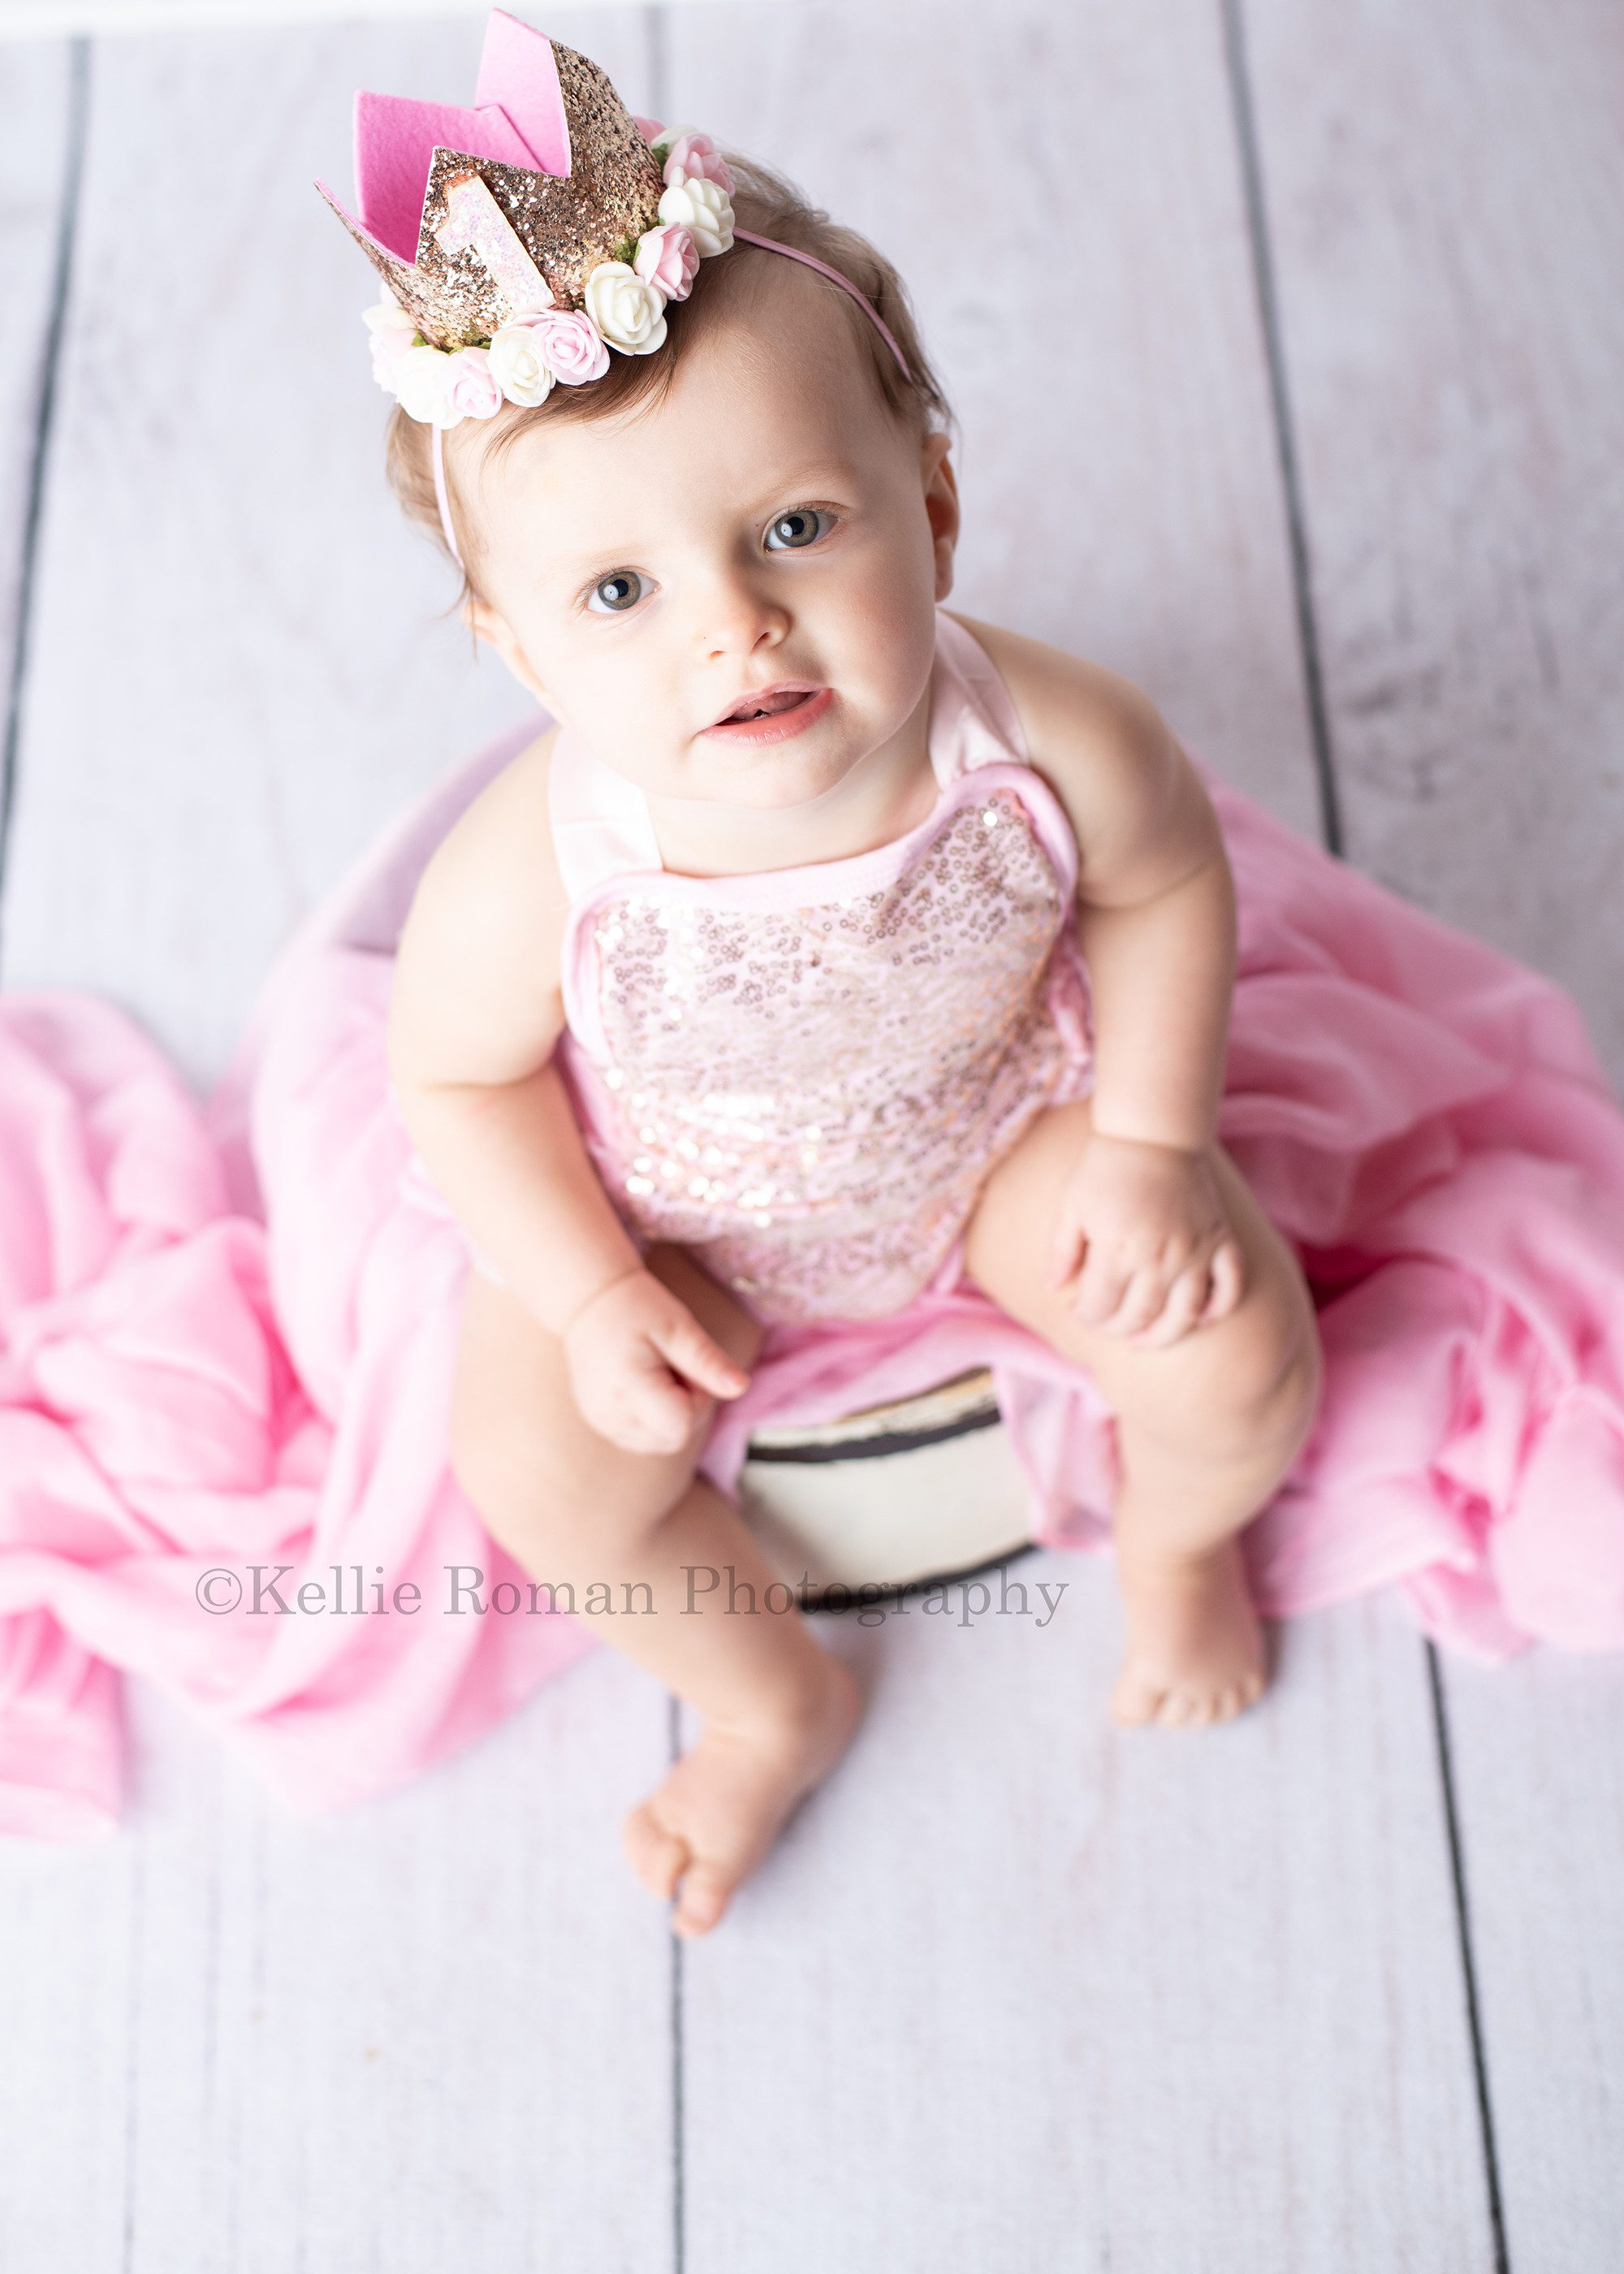 girlie cake smash a one year old girl is in a milwaukee photographers studio she's wearing a pink romper with gold sequins on the front. She's sitting on a white wood tub, and is looking up and smiling at the camera. the shot is very bright and white and airy.